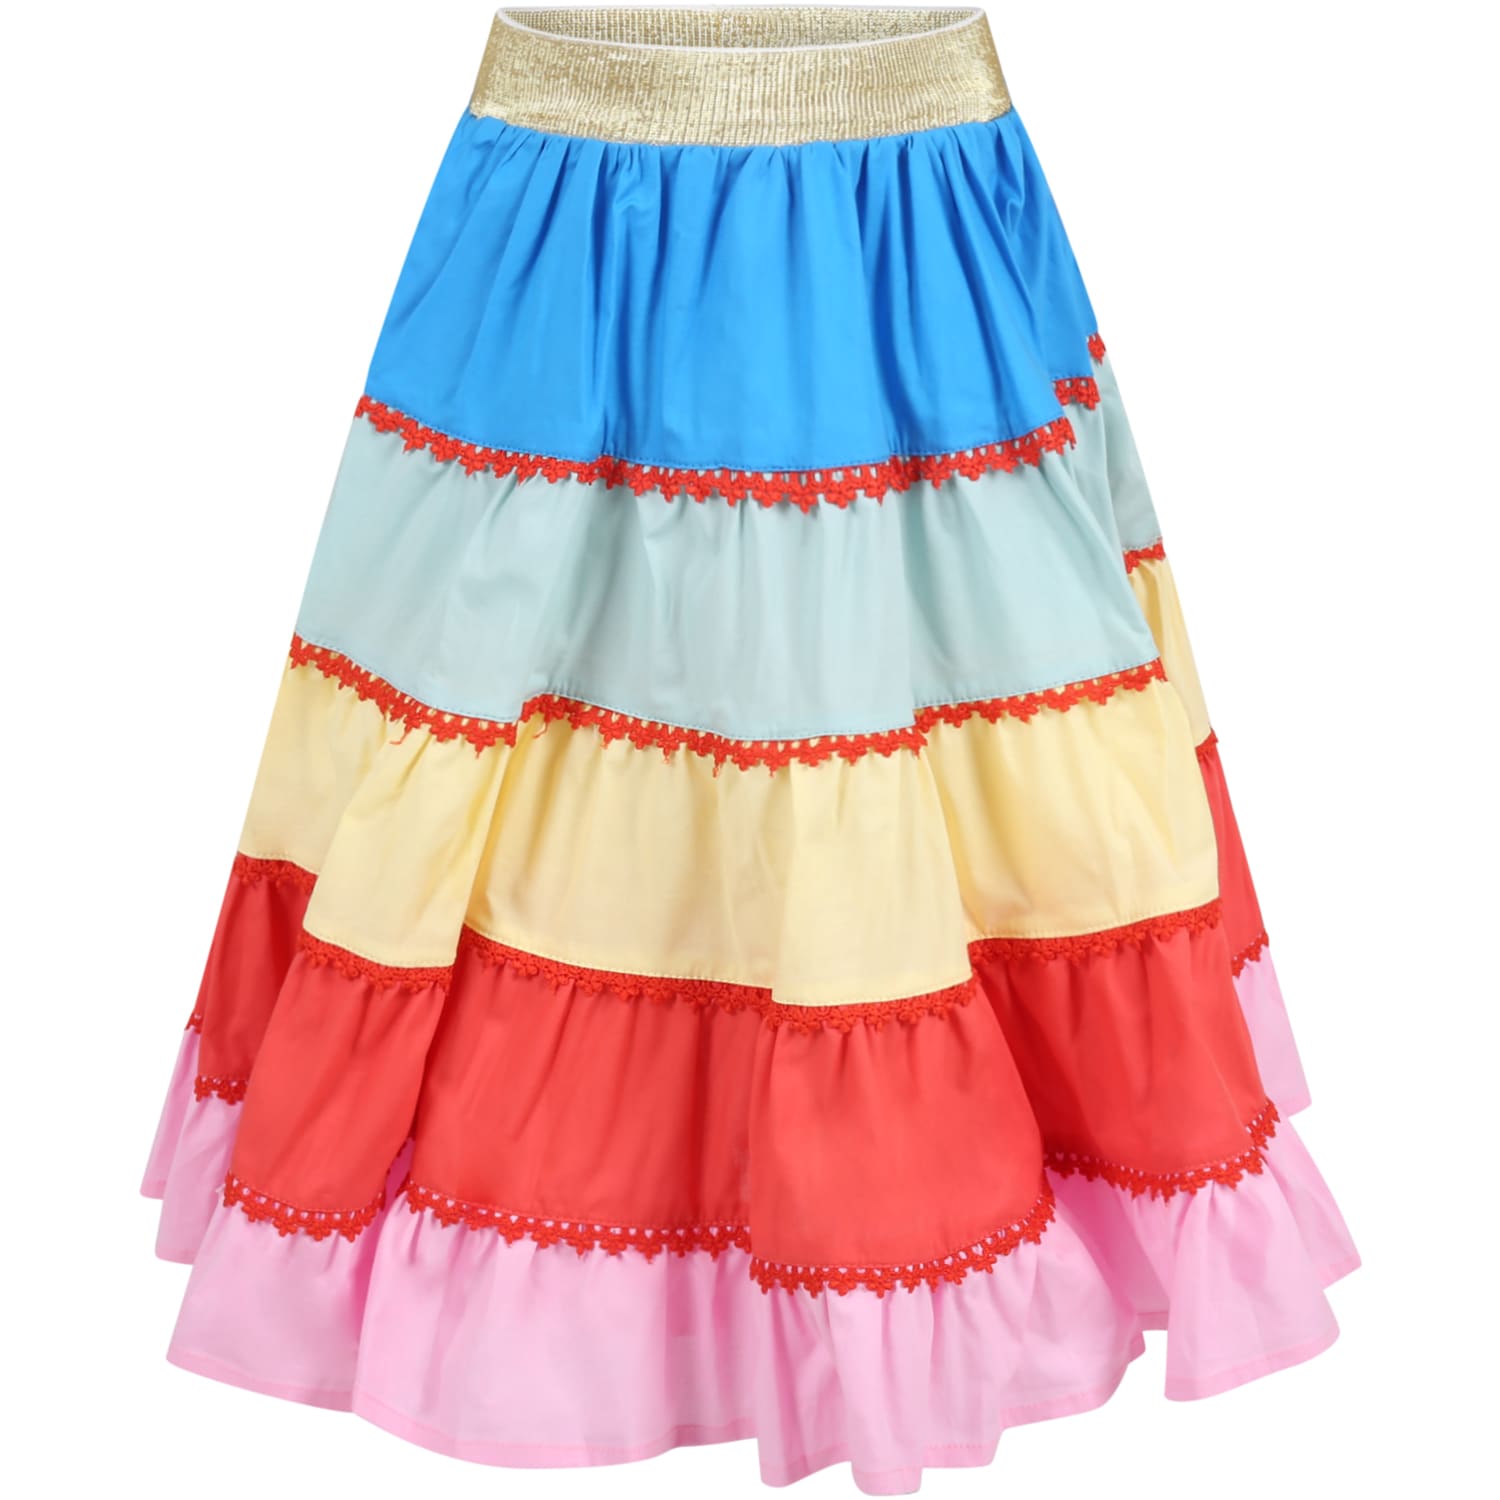 Raspberry Plum Multicolor Skirt For Girl With Red Details